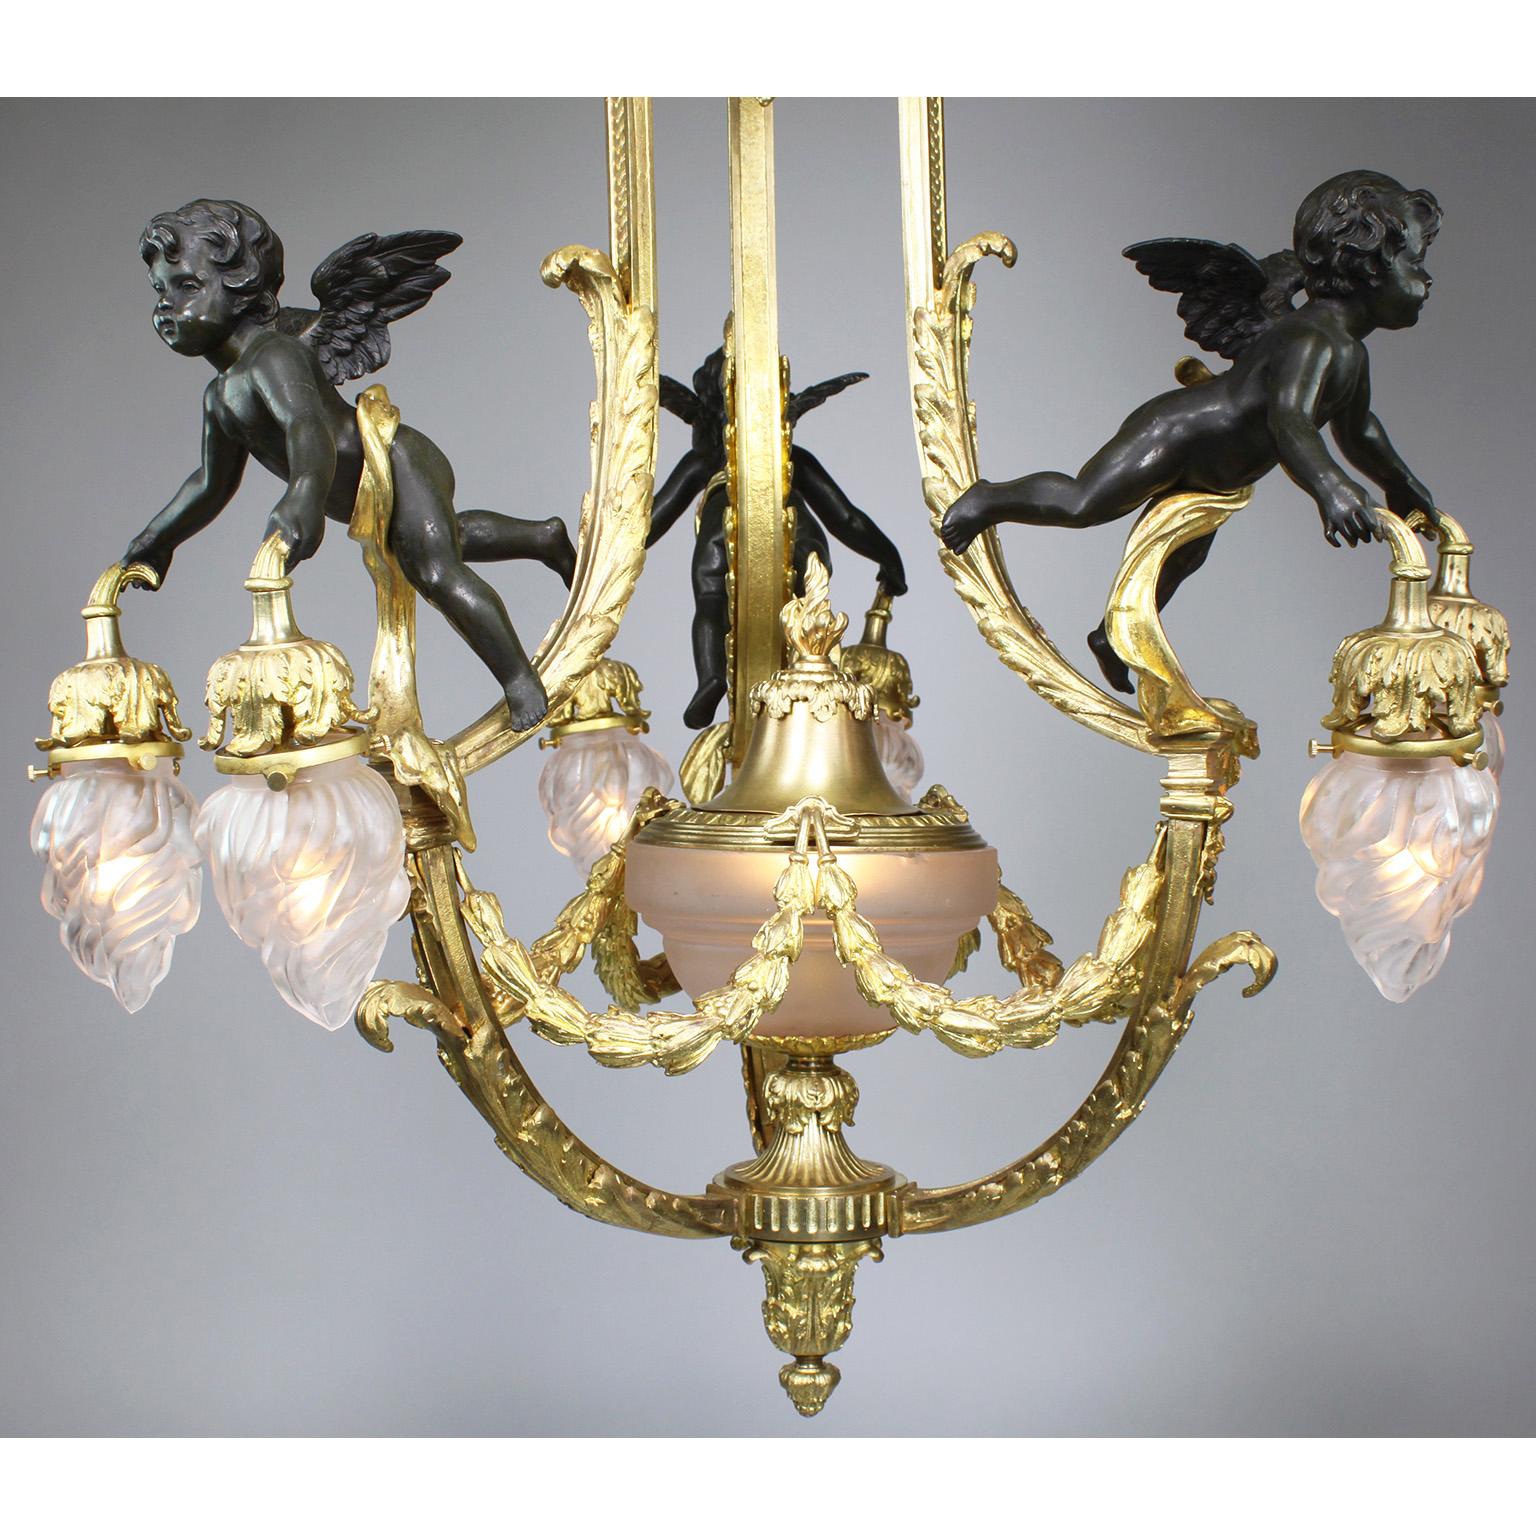 French 19th/20th Century Belle Époque Gilt & Patinated Bronze Cherub Chandelier In Good Condition For Sale In Los Angeles, CA